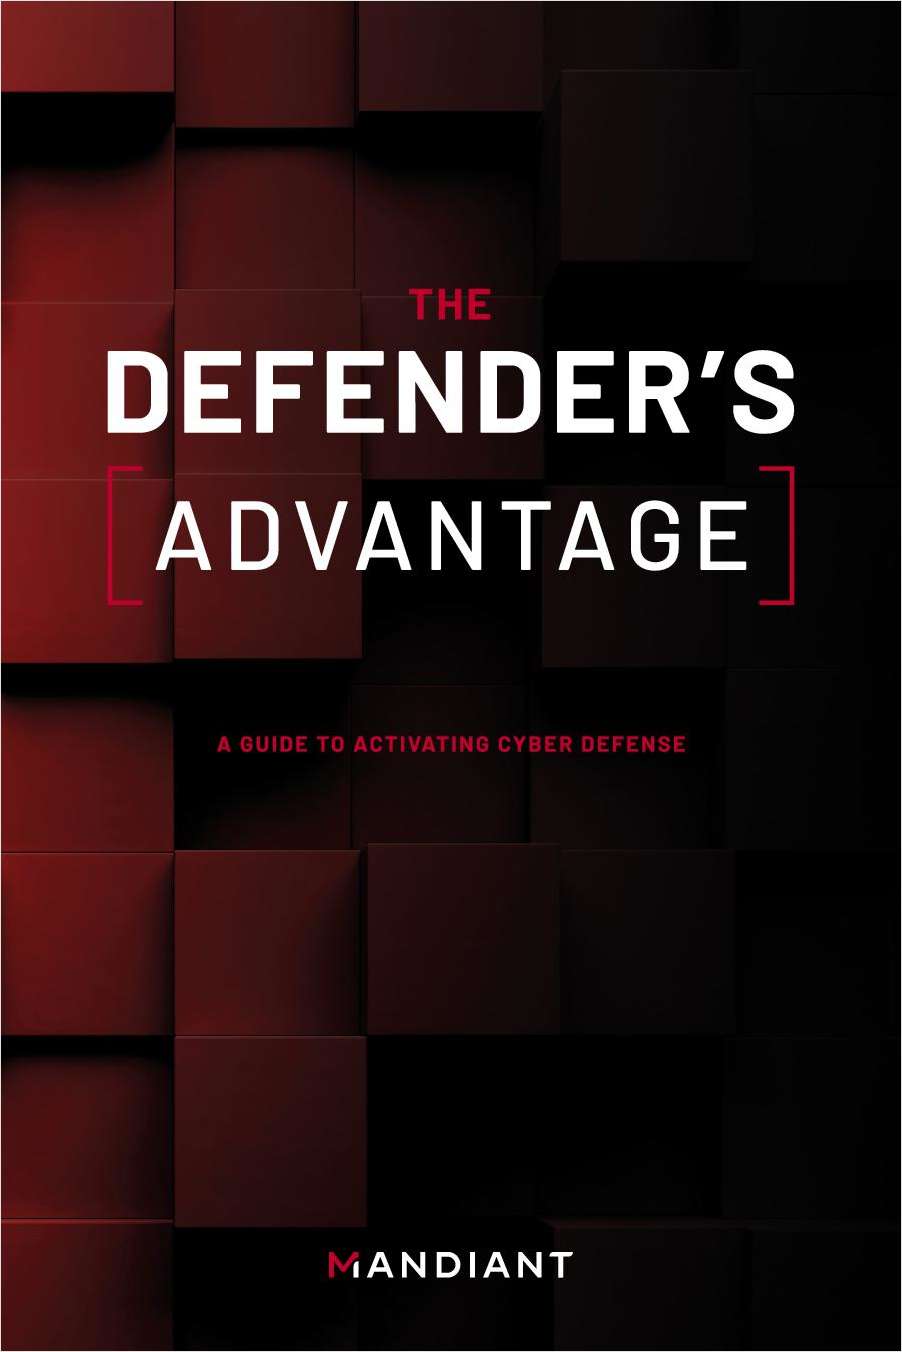 The Defender's Advantage - A Guide to Activating Cyber Defense